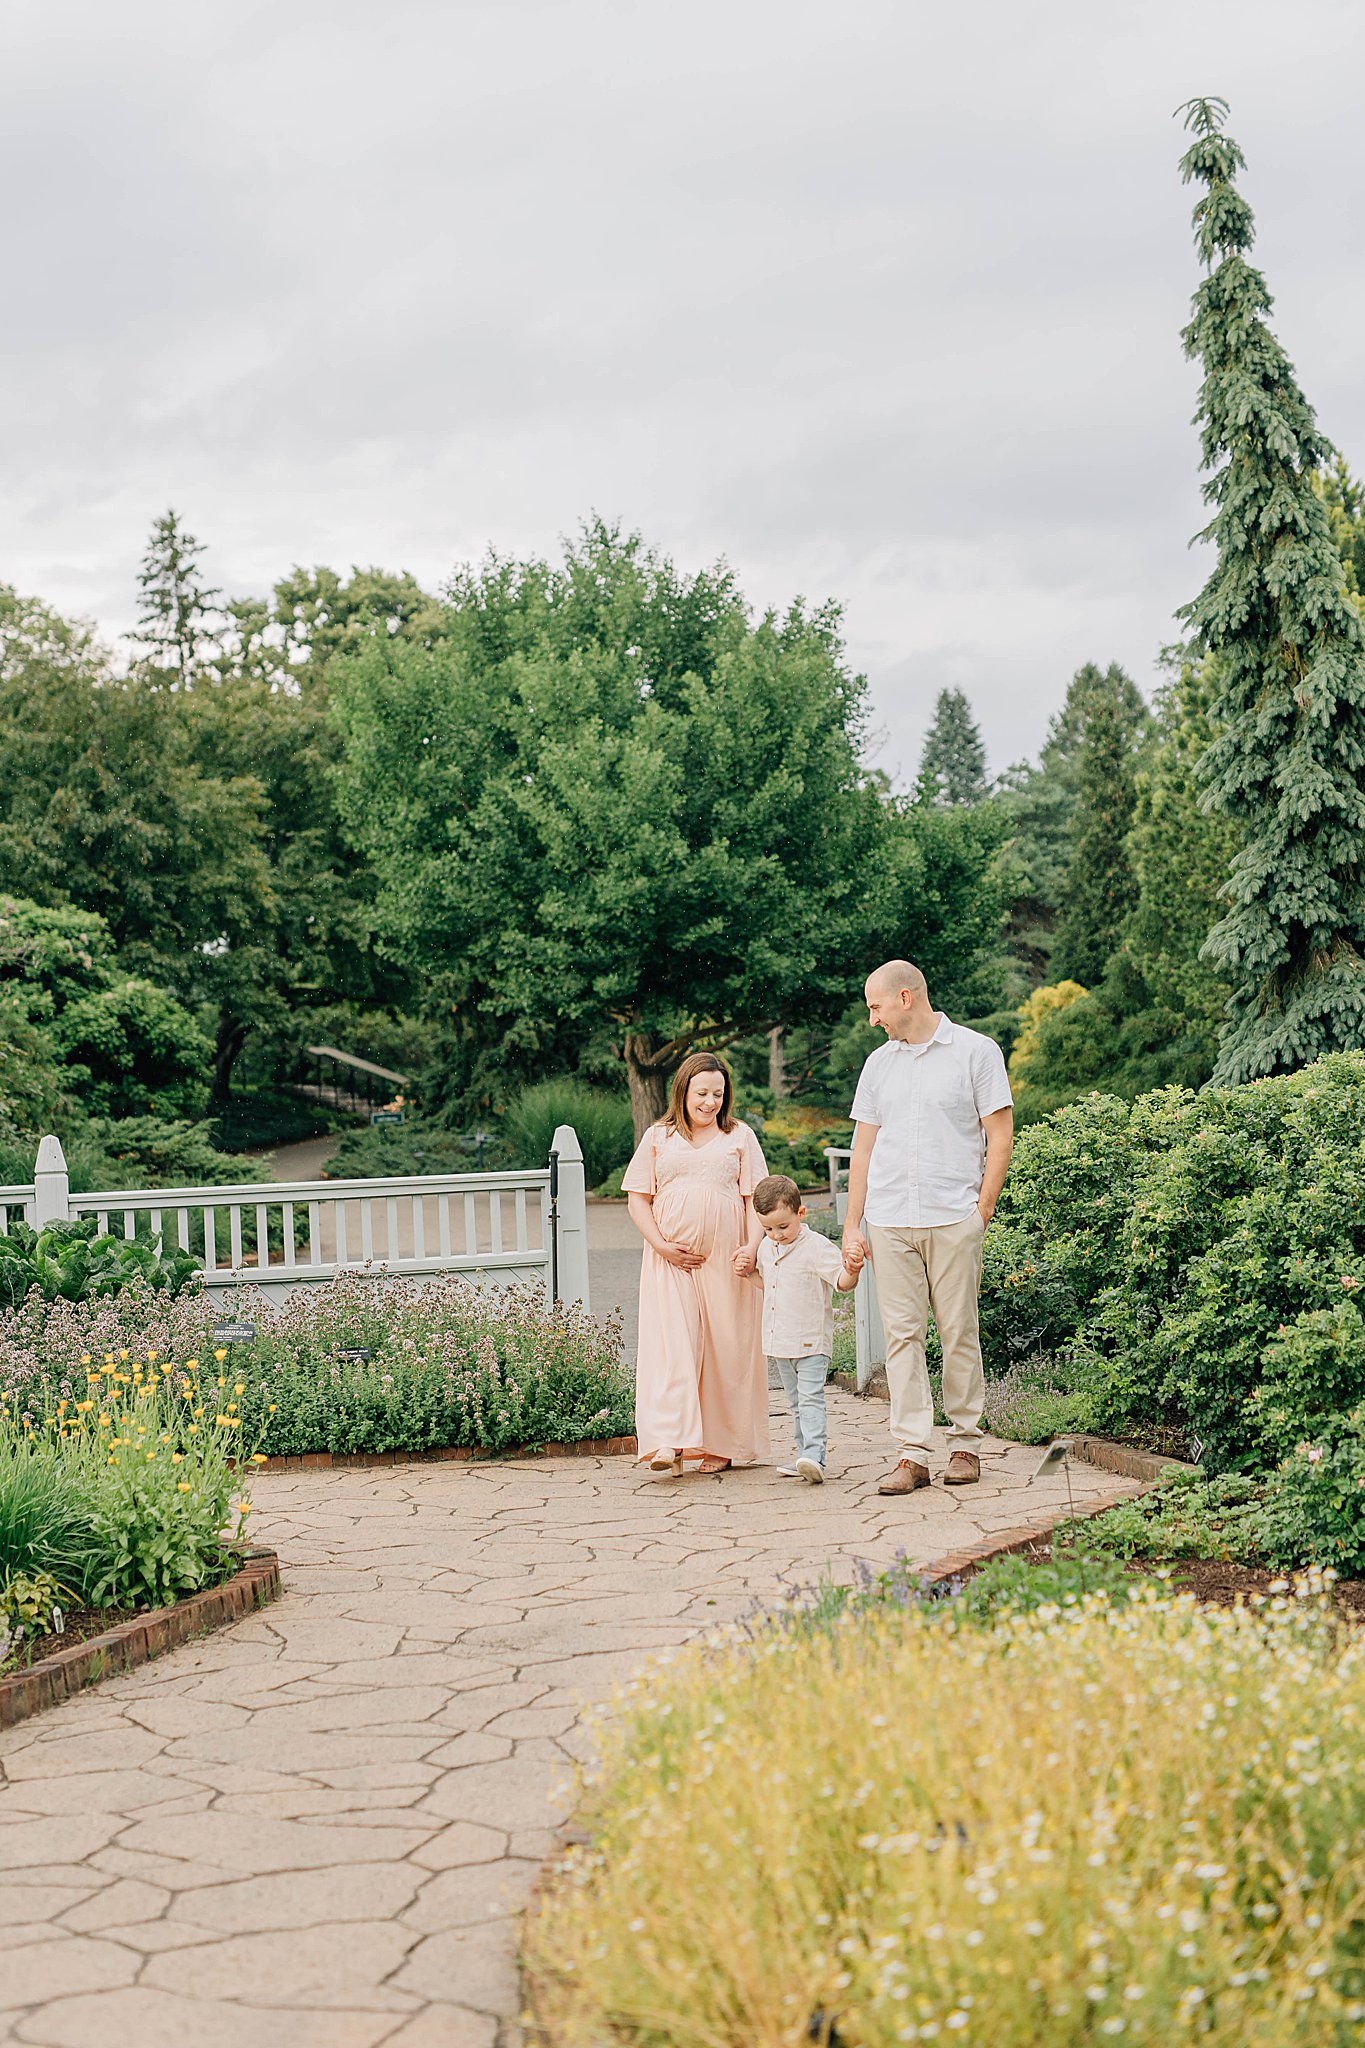 Summer Maternity photos with son, dad and momma walking.